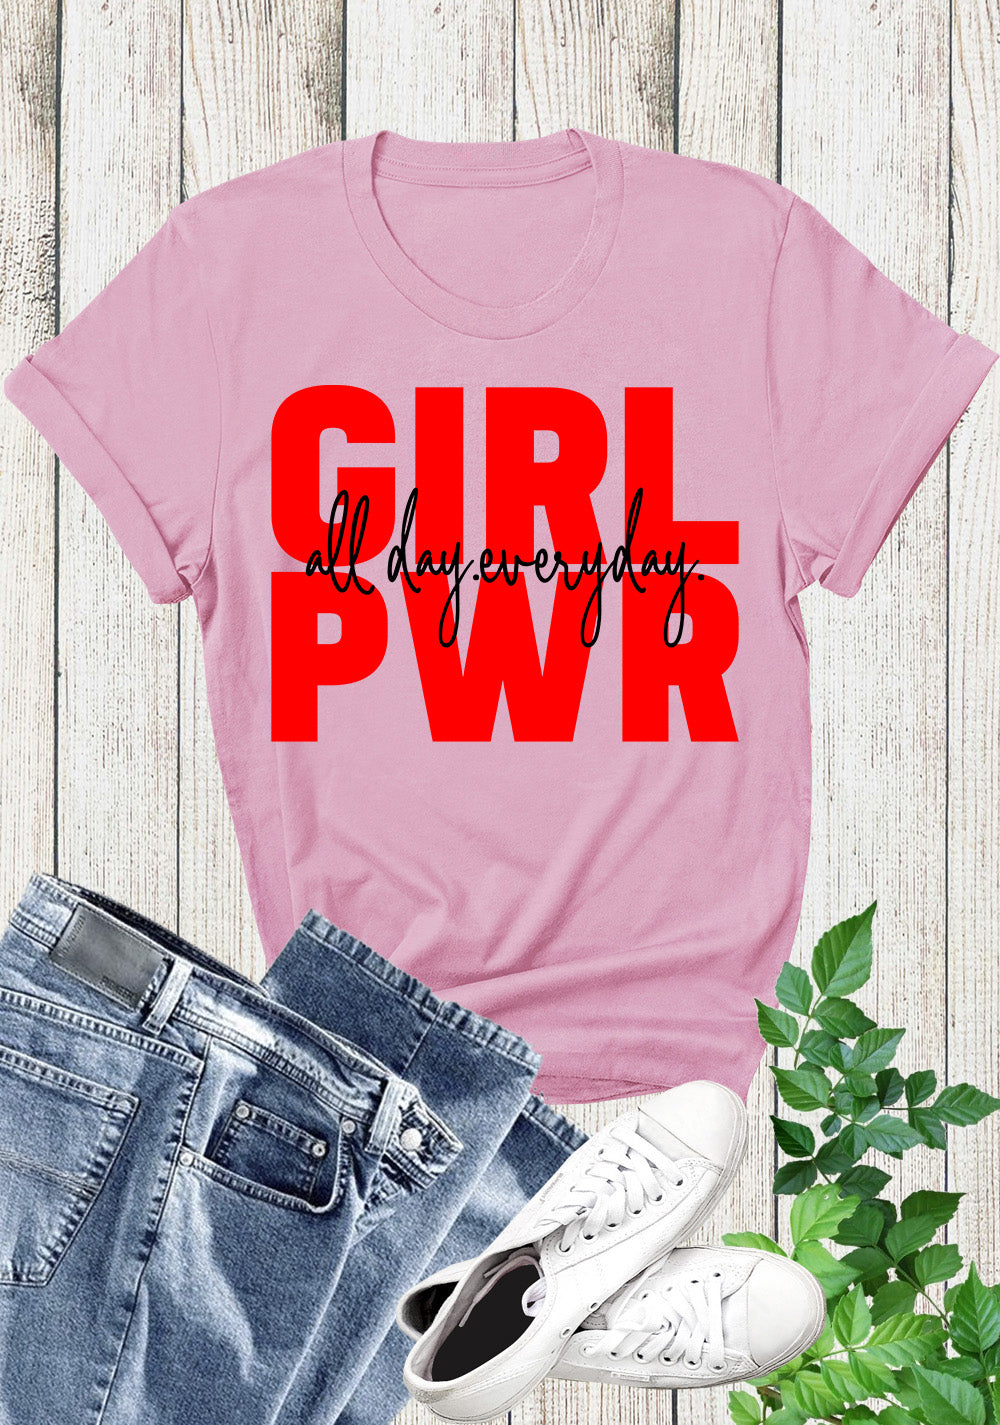 Girls Power All Day Everyday Shirts